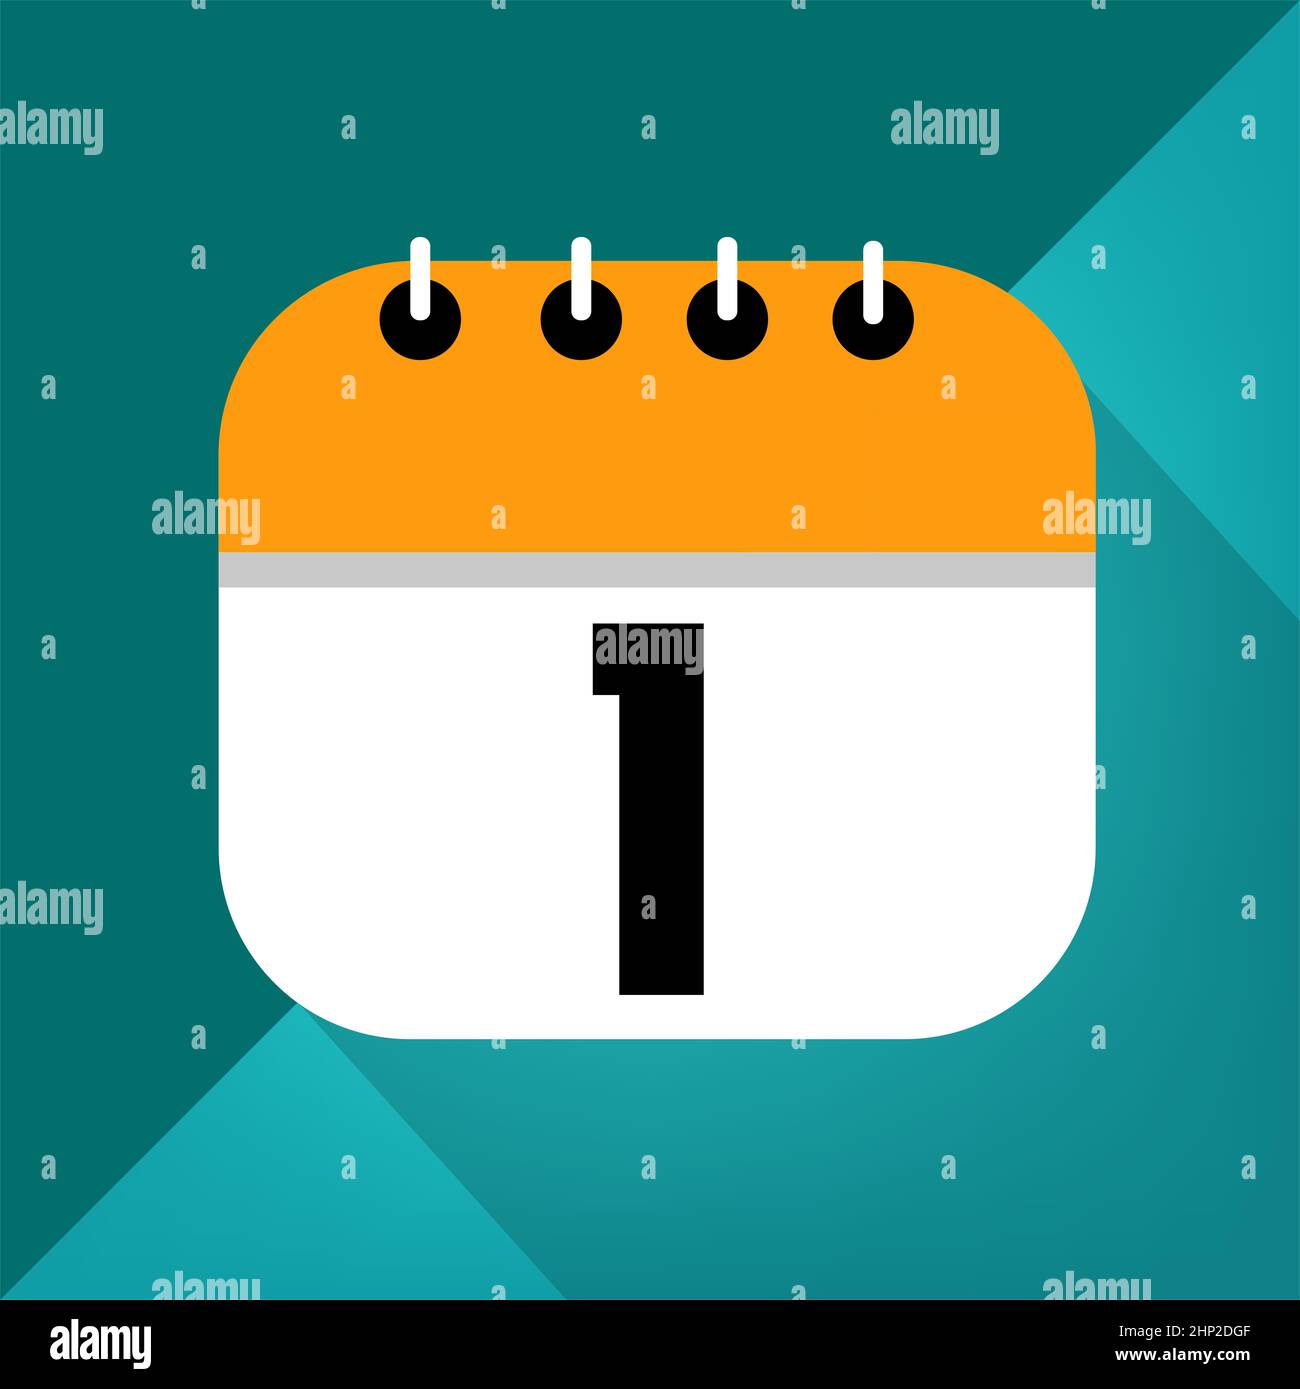 White and orange calendar icon with shading. Day 1 in black. Stock Photo